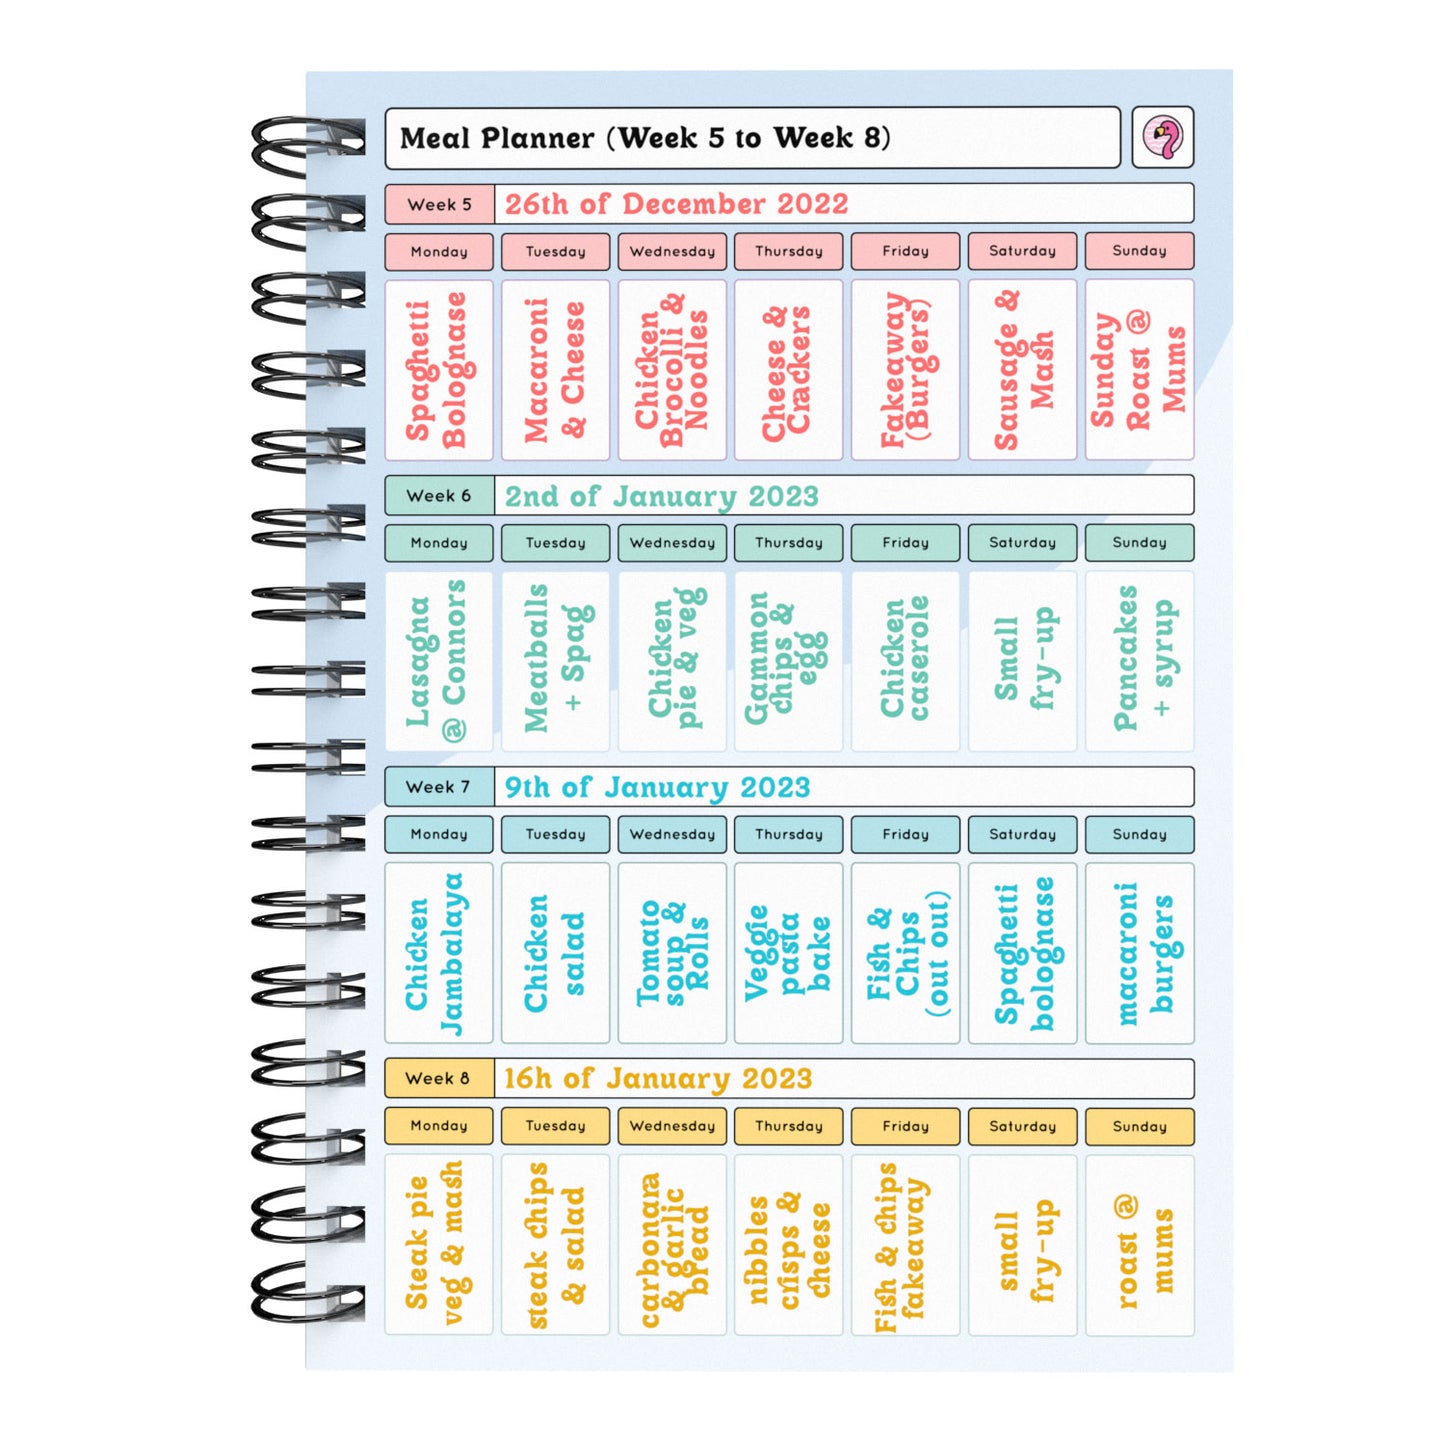 Food Diary - C18 - Calorie Counting